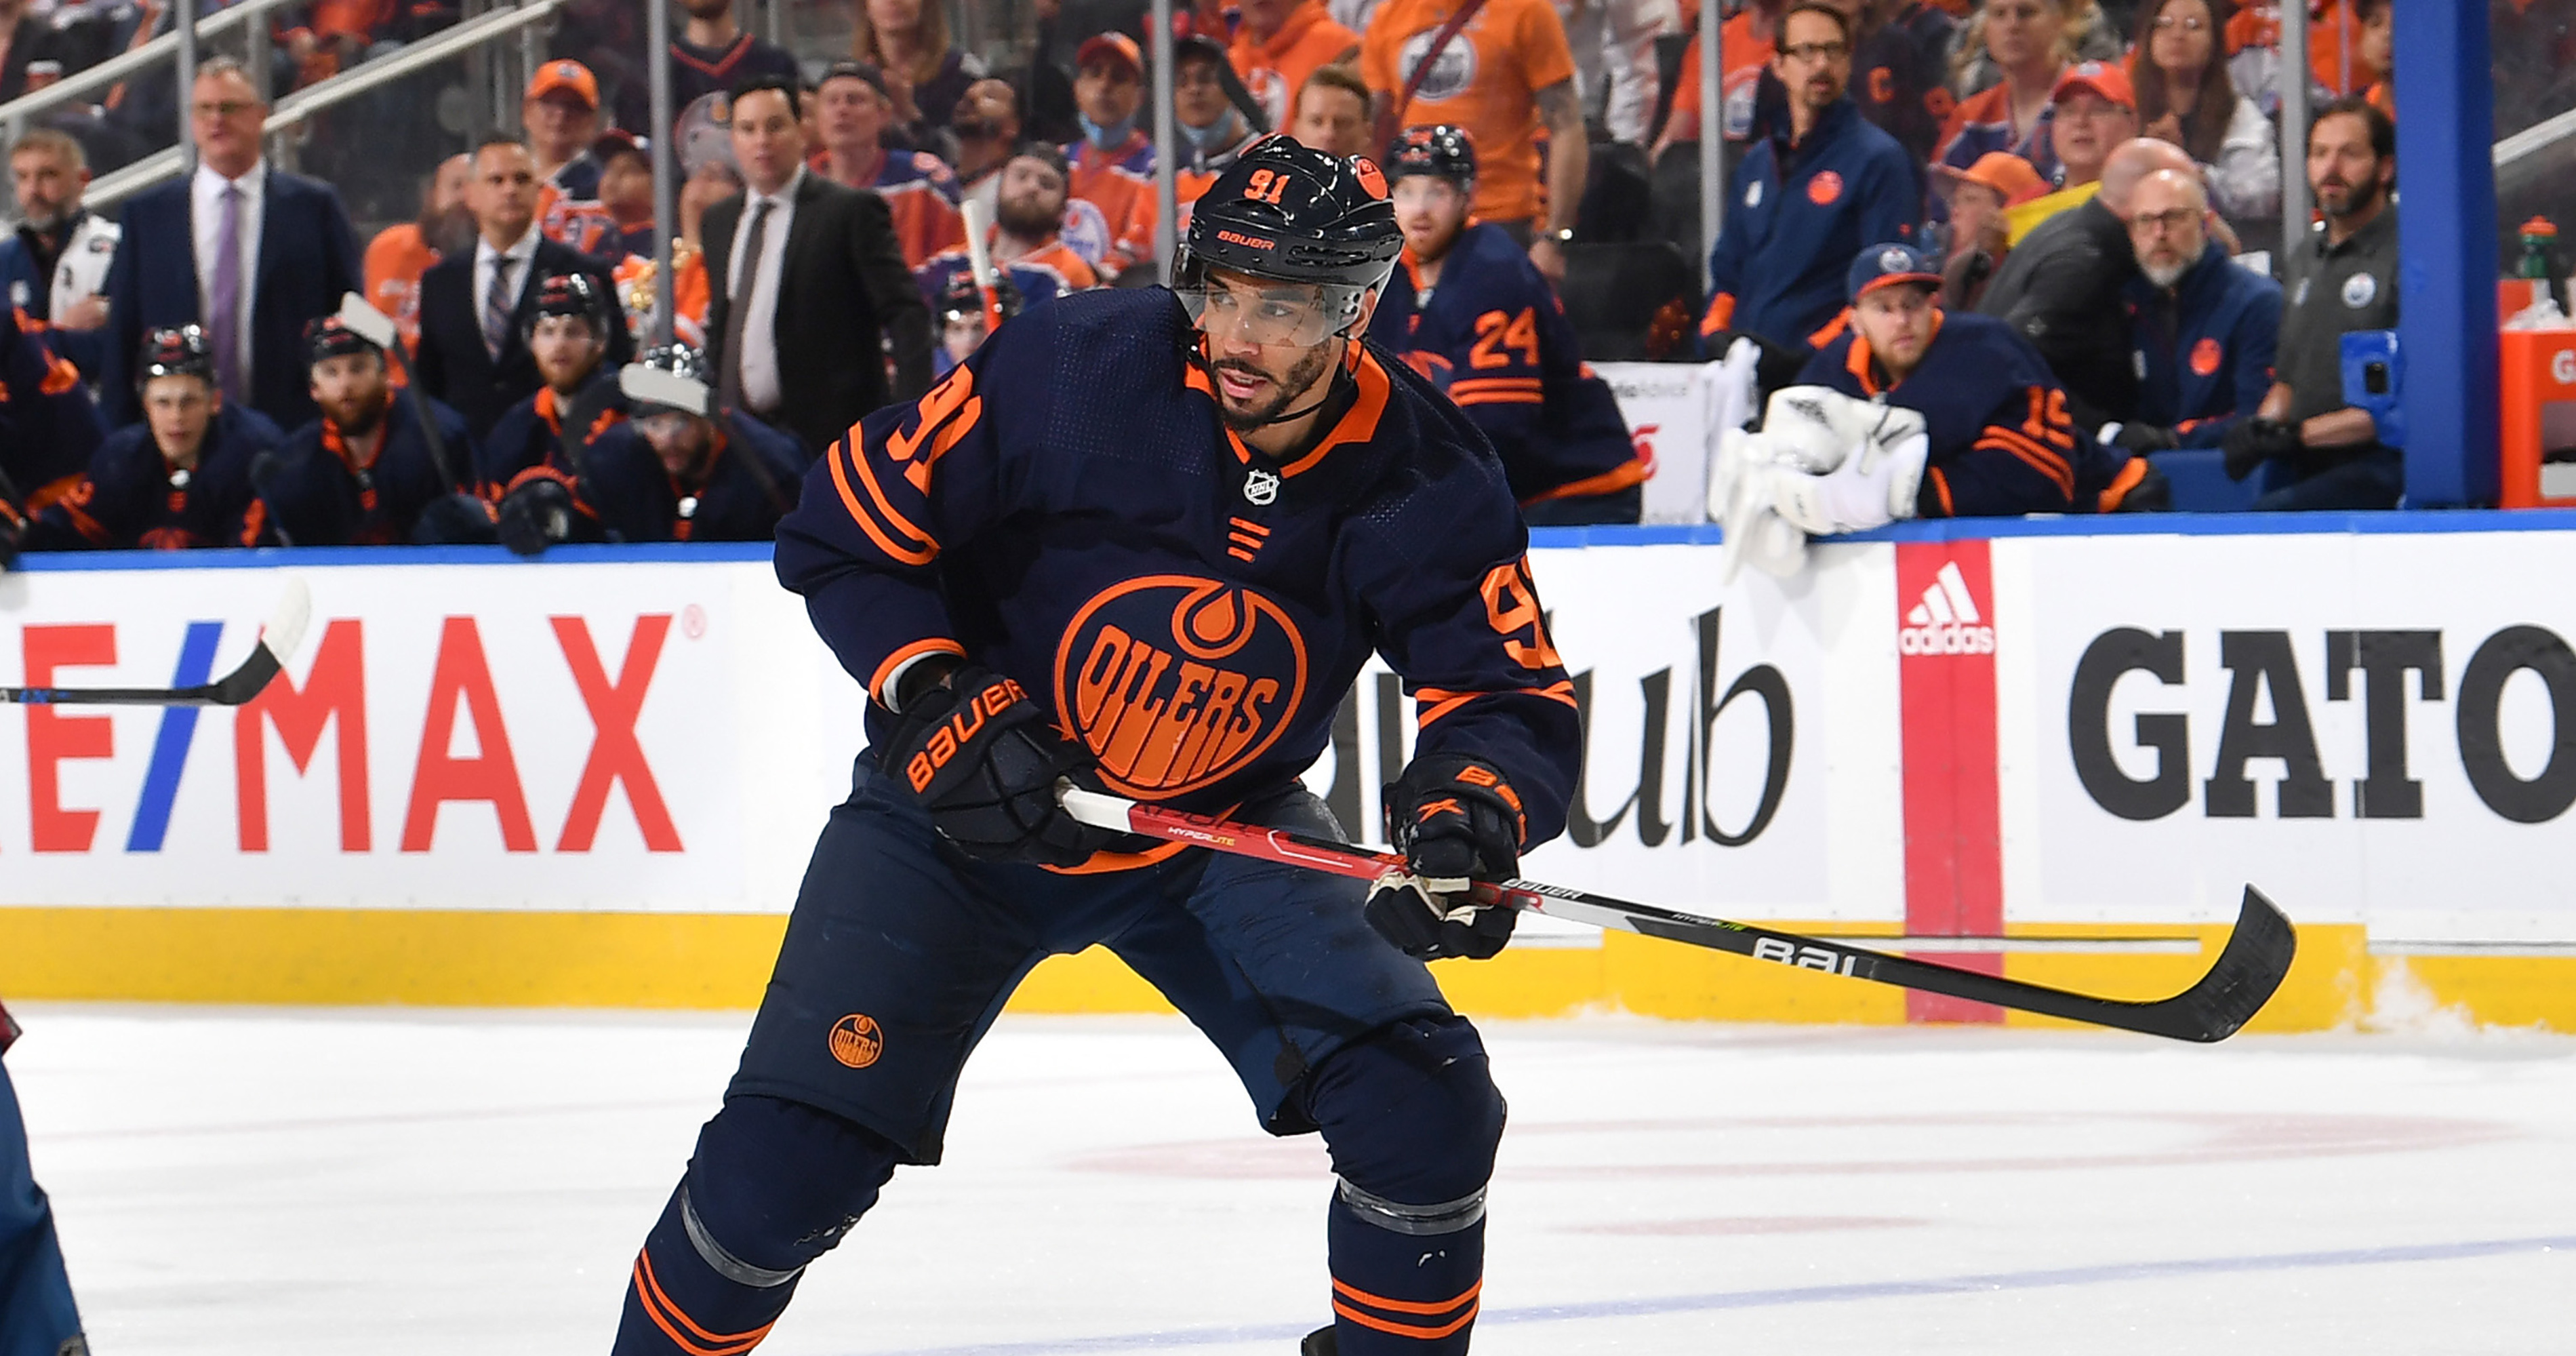 Evander Kane, Oilers Agree to 4year, 5.125M AAV Contract amid 2022